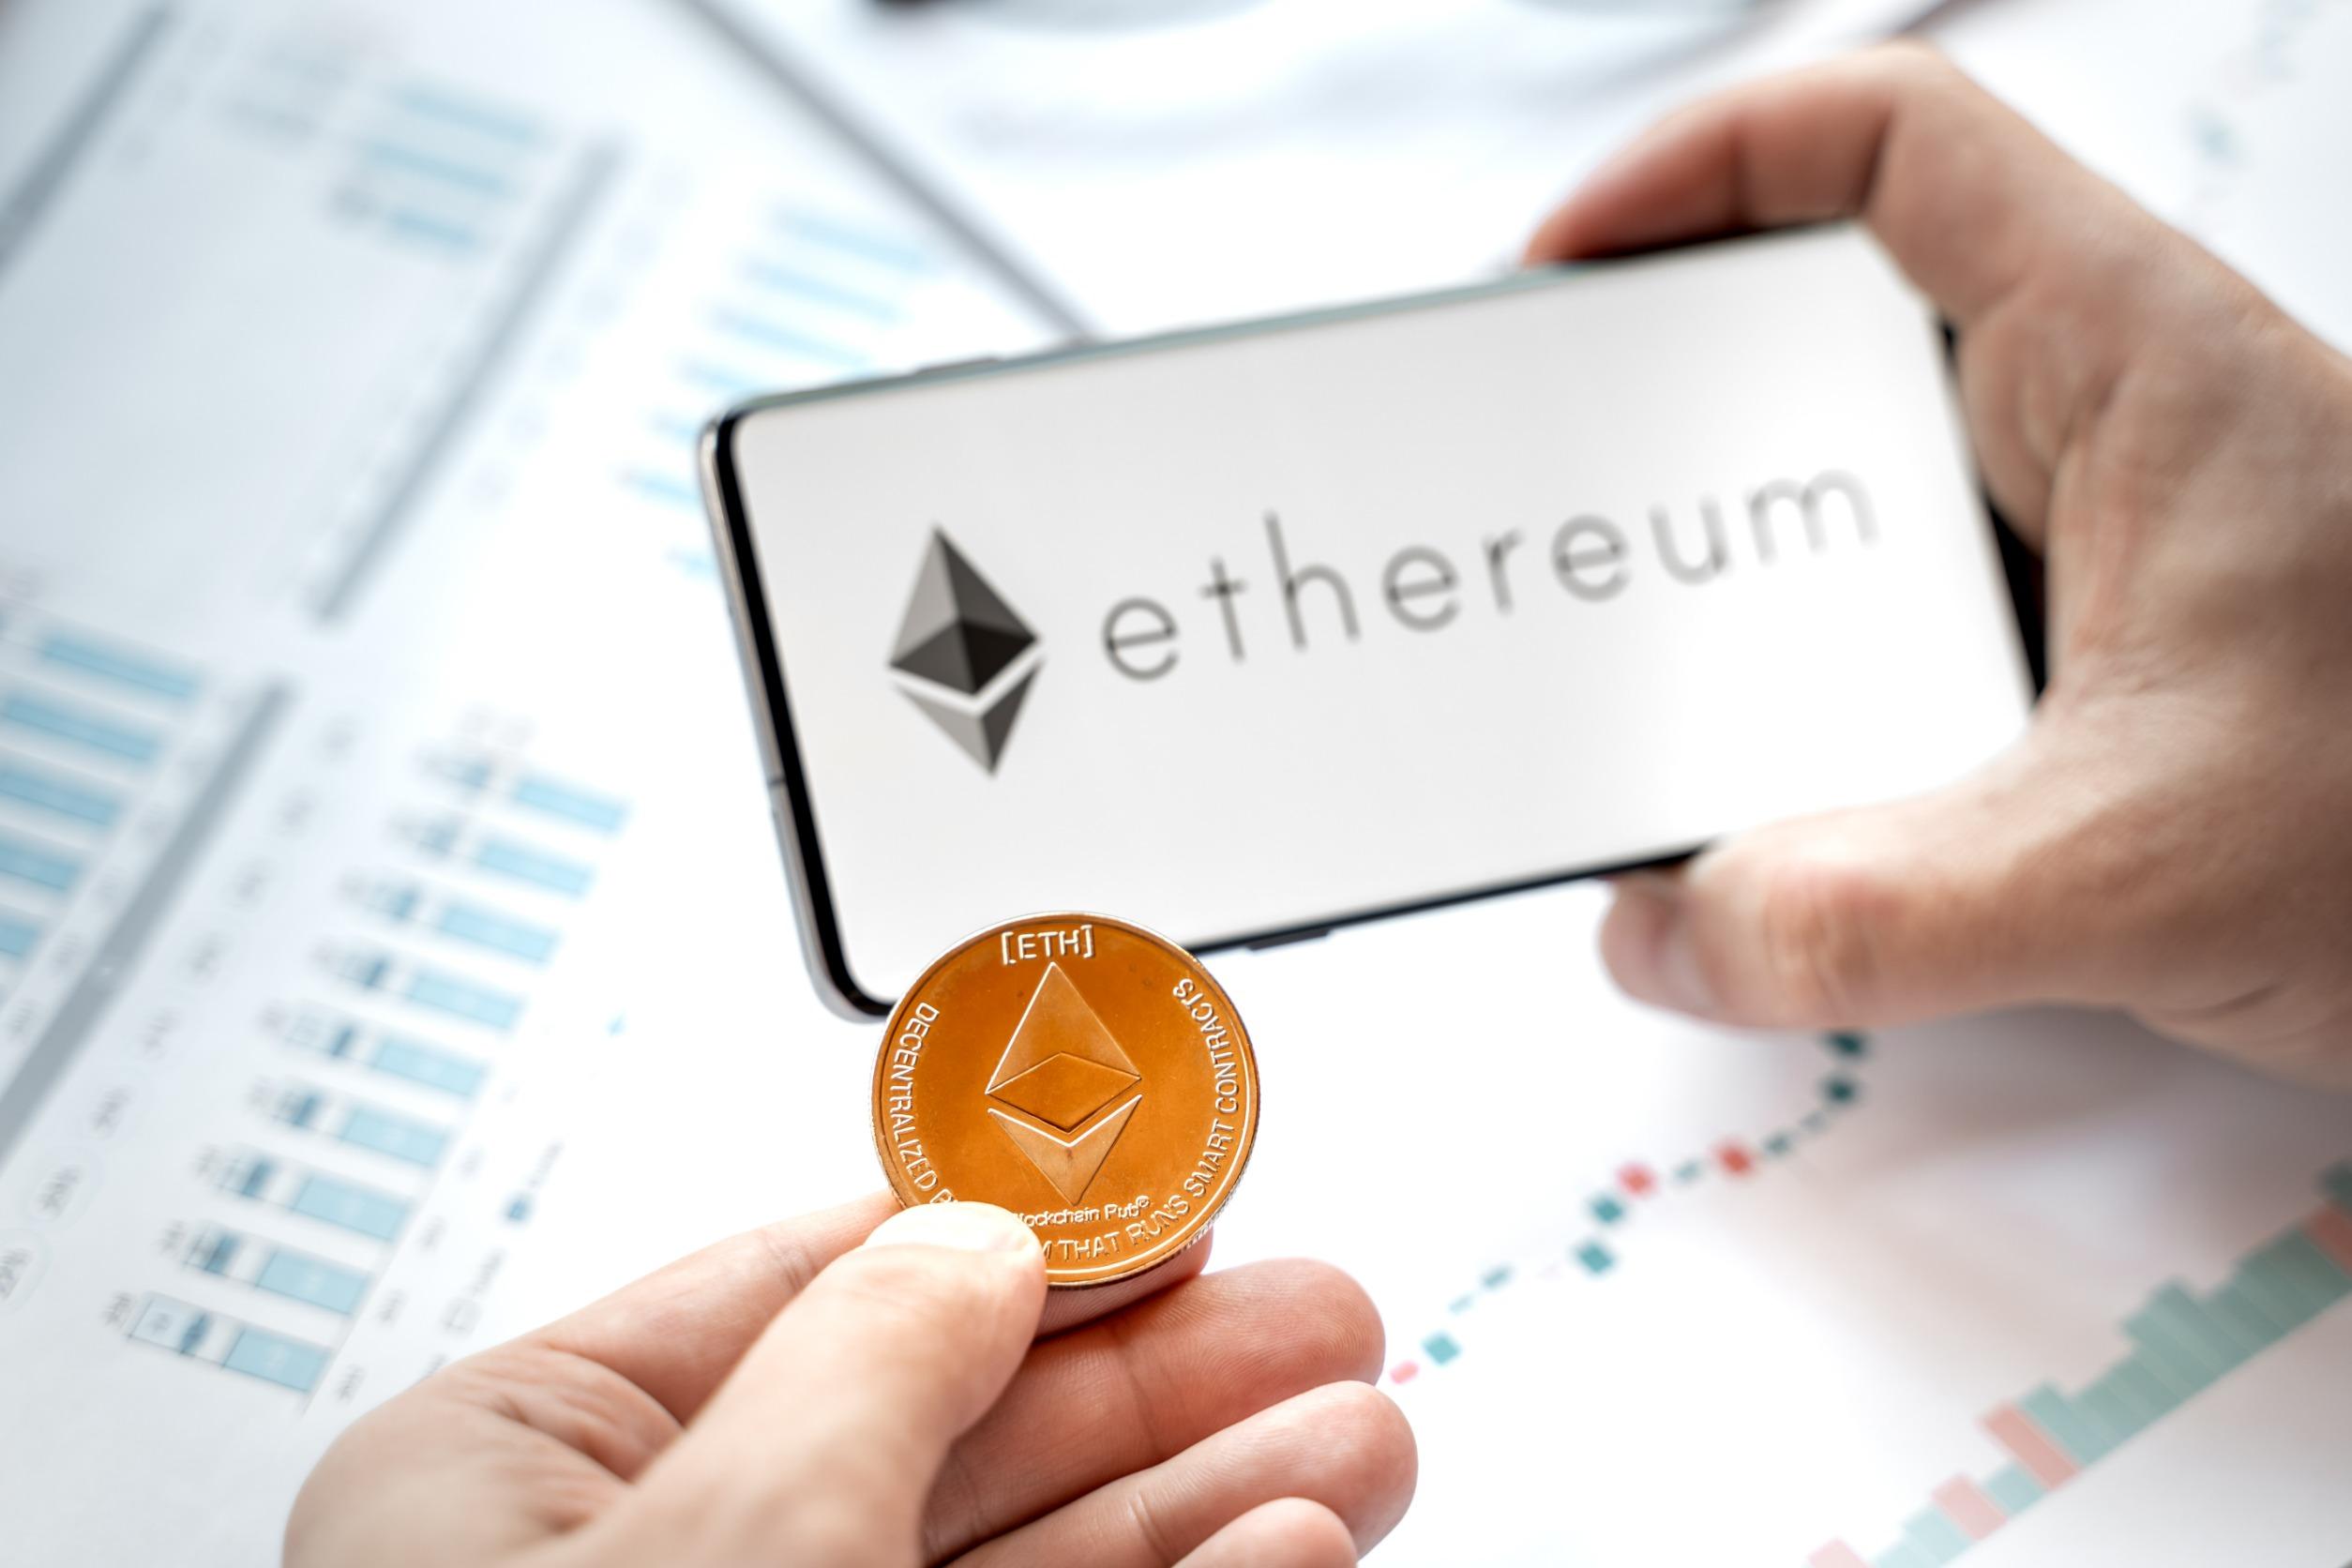 Ethereum price forecast: US inflation data & earnings season in focus